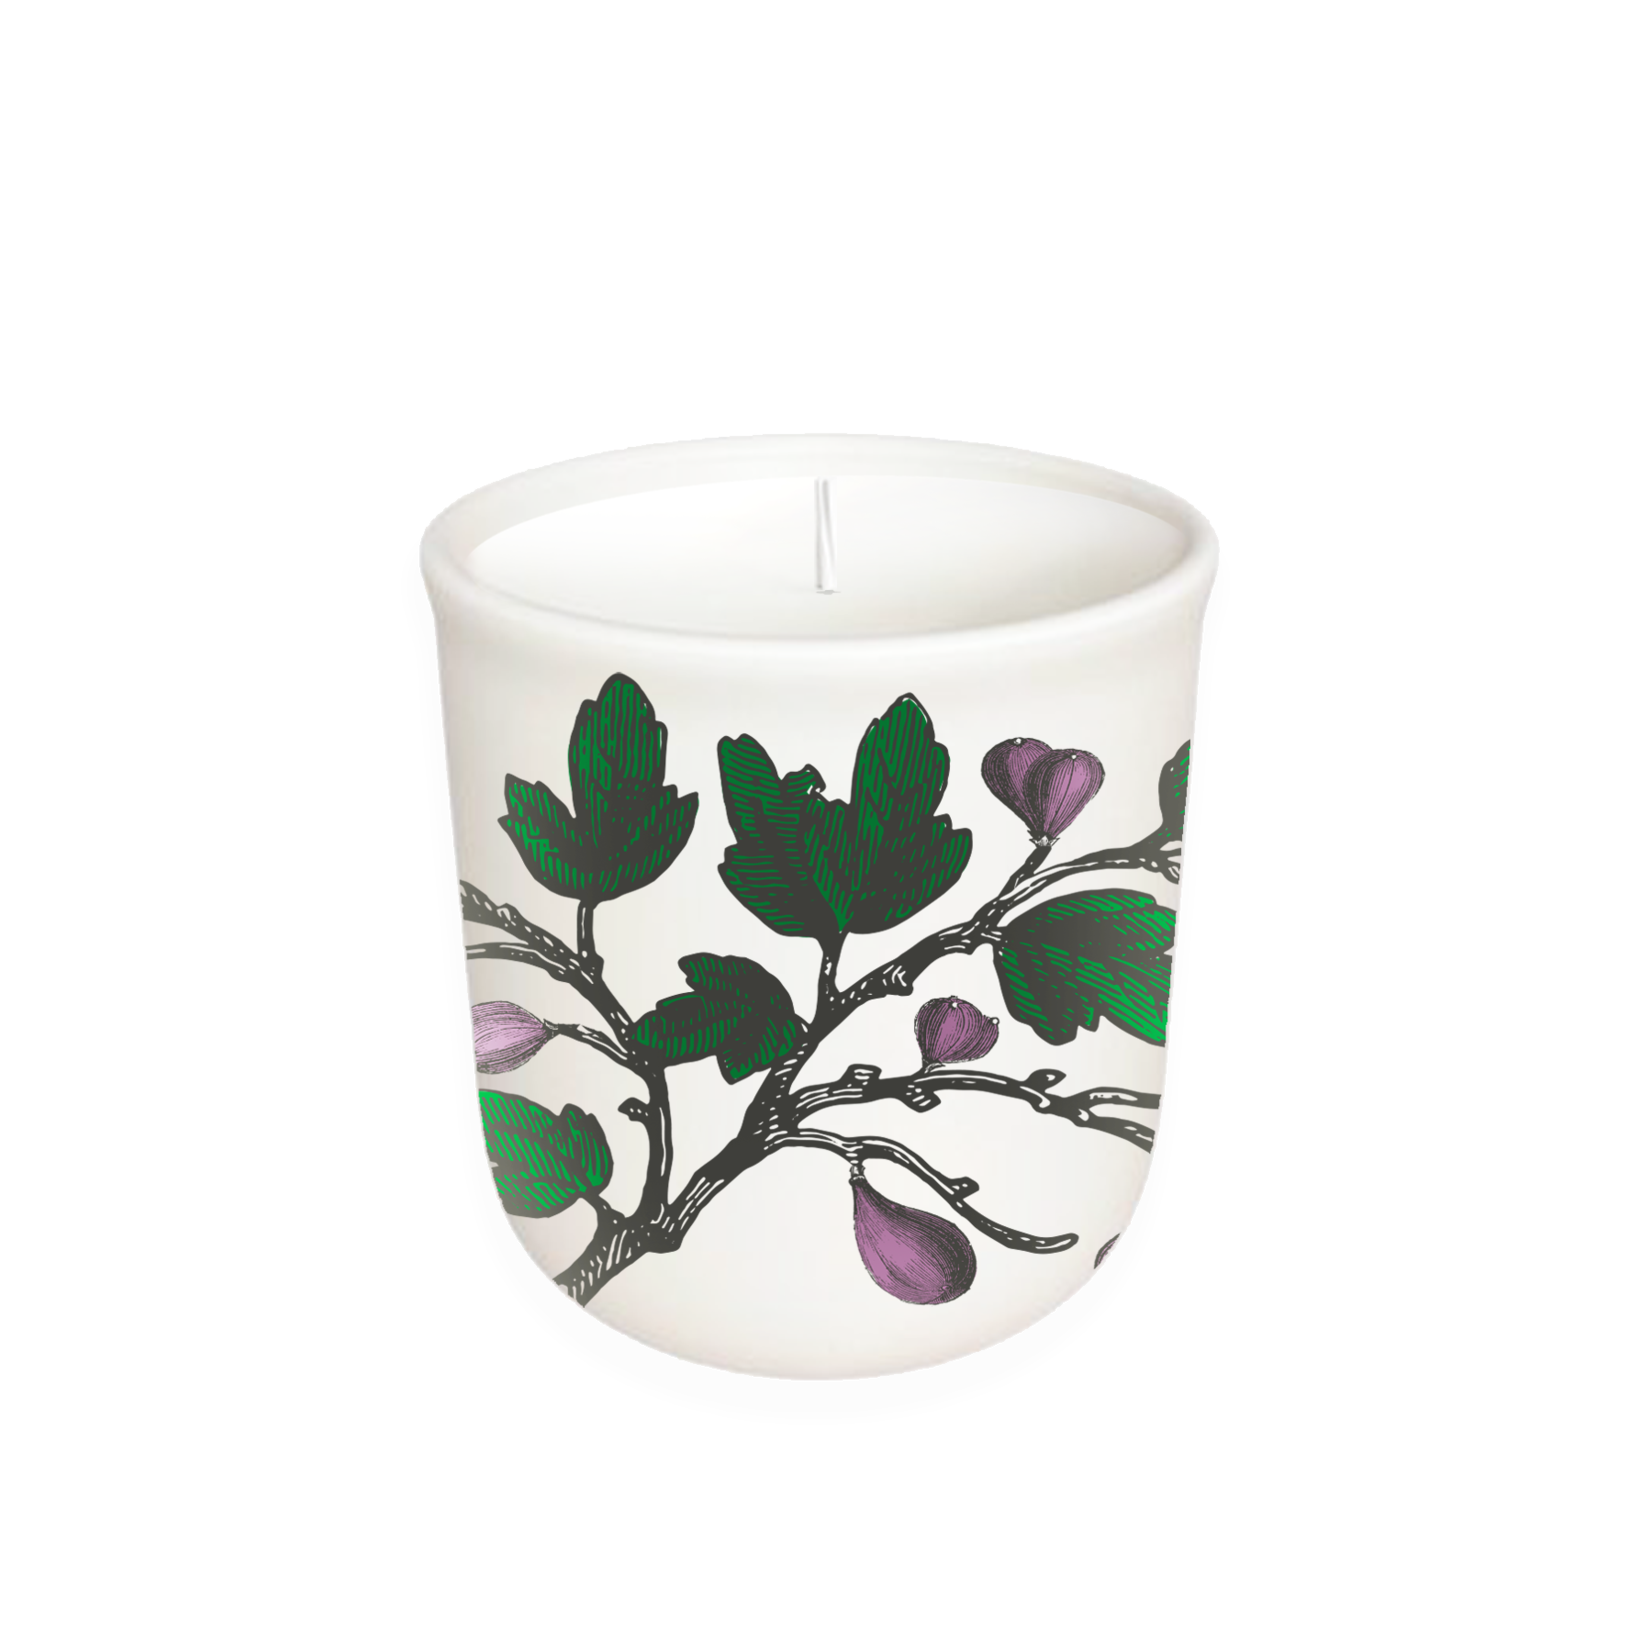 Annapolis Candle Annapolis Candle - Terrace Fig Tree Boxed Candle